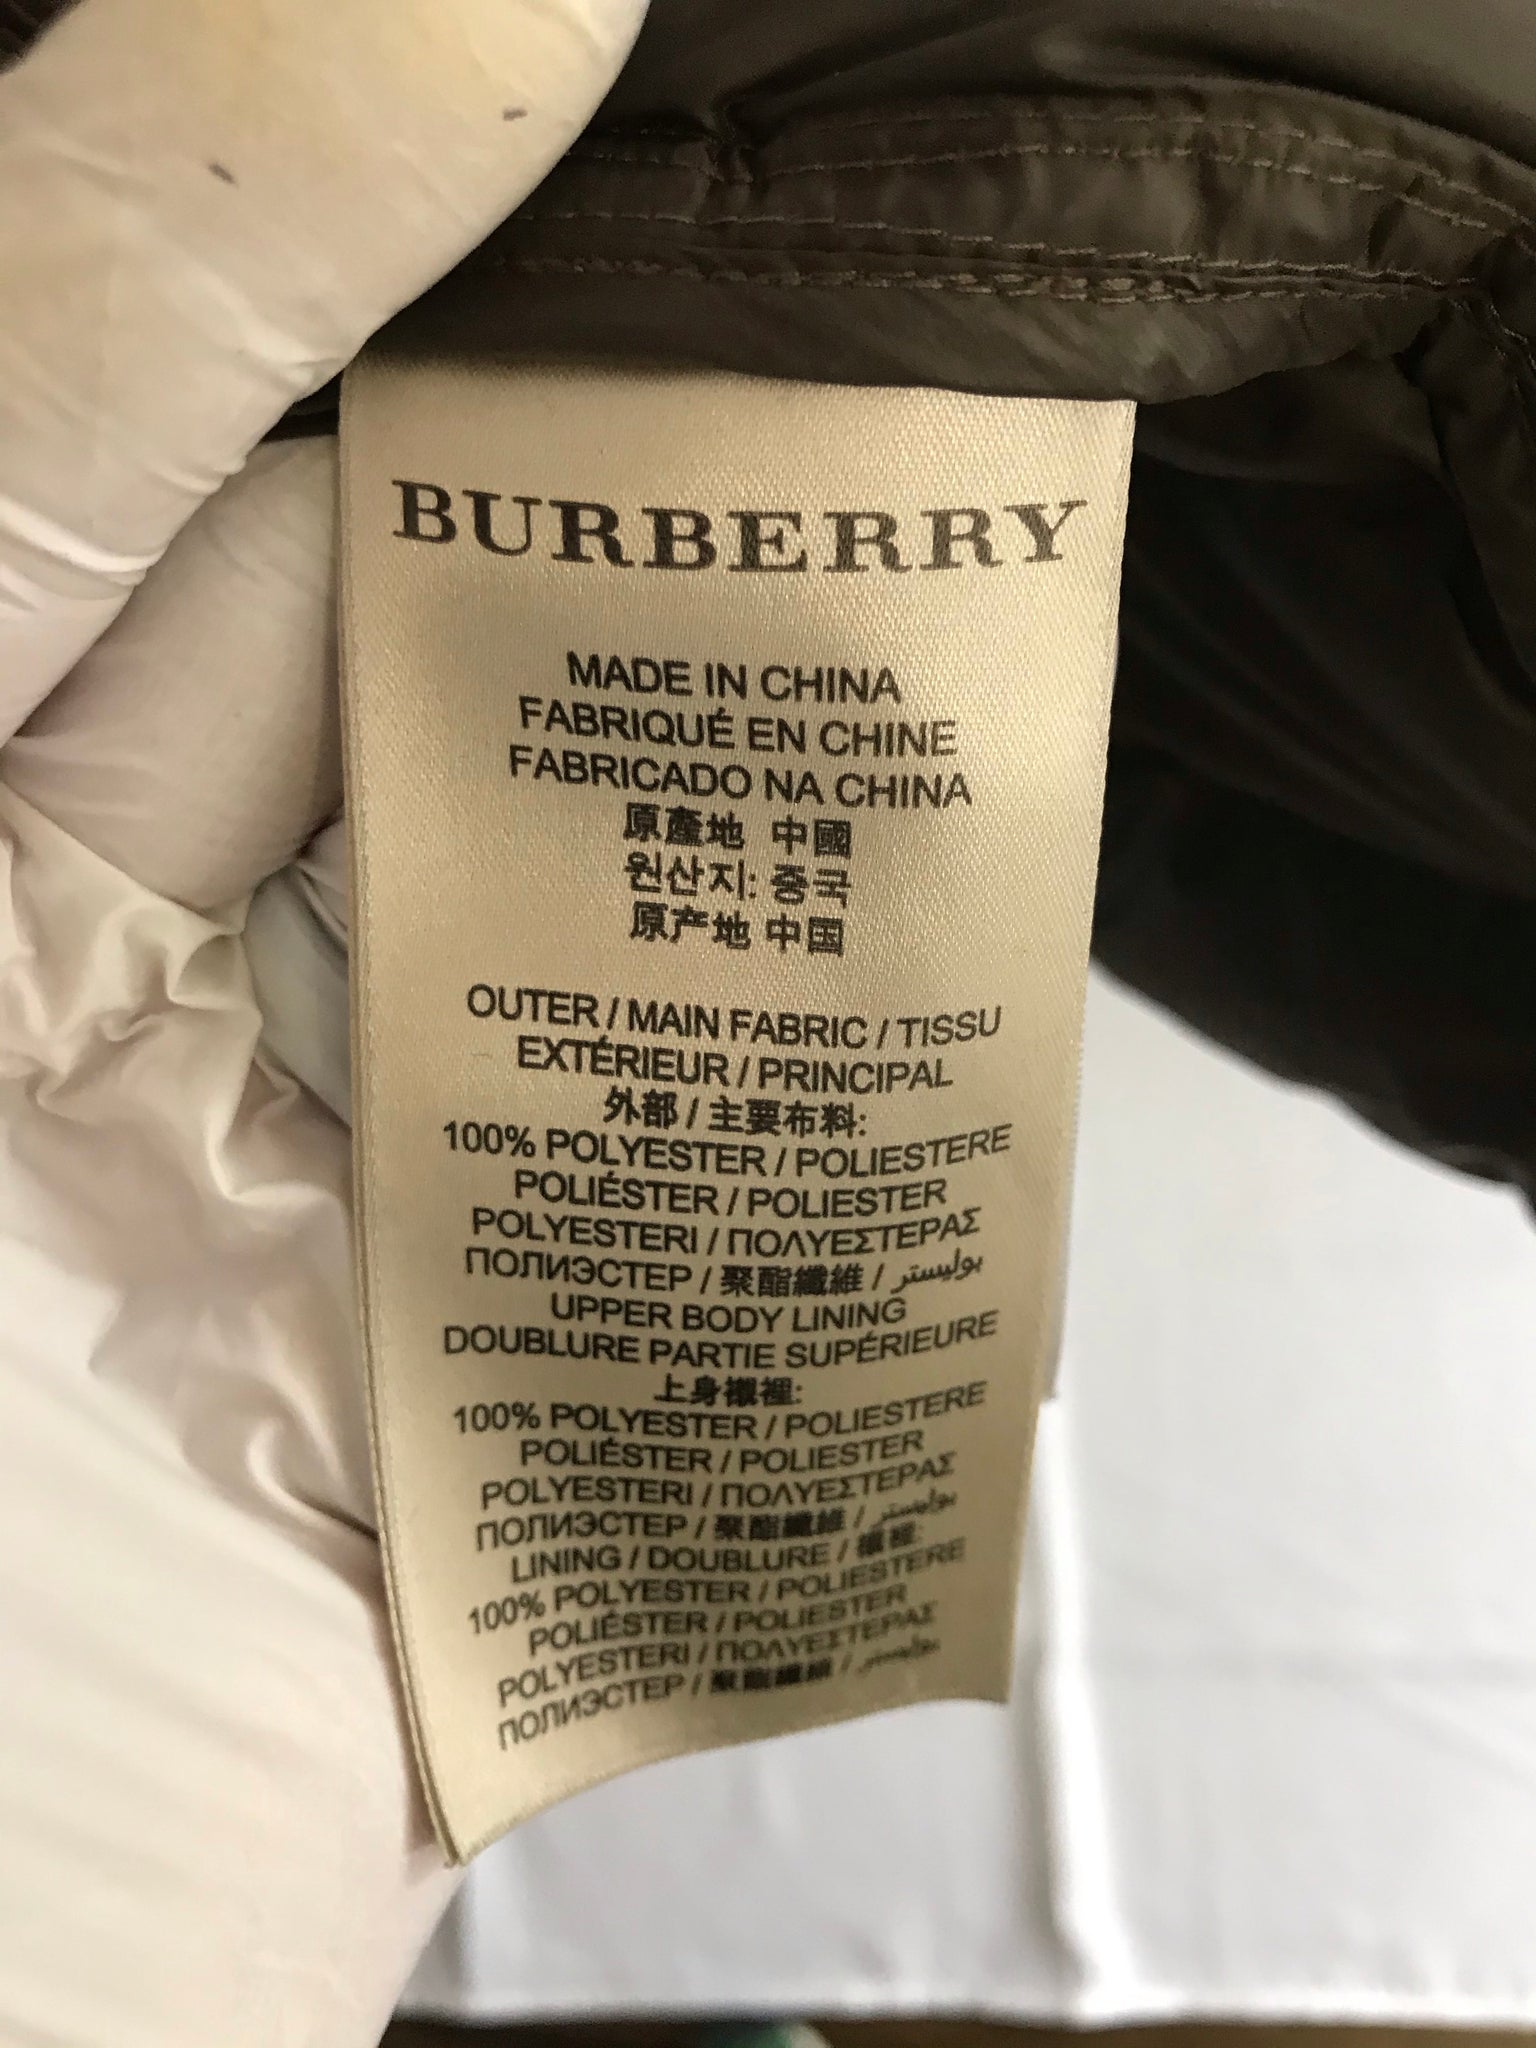 Arriba 63+ imagen is burberry brit made in china